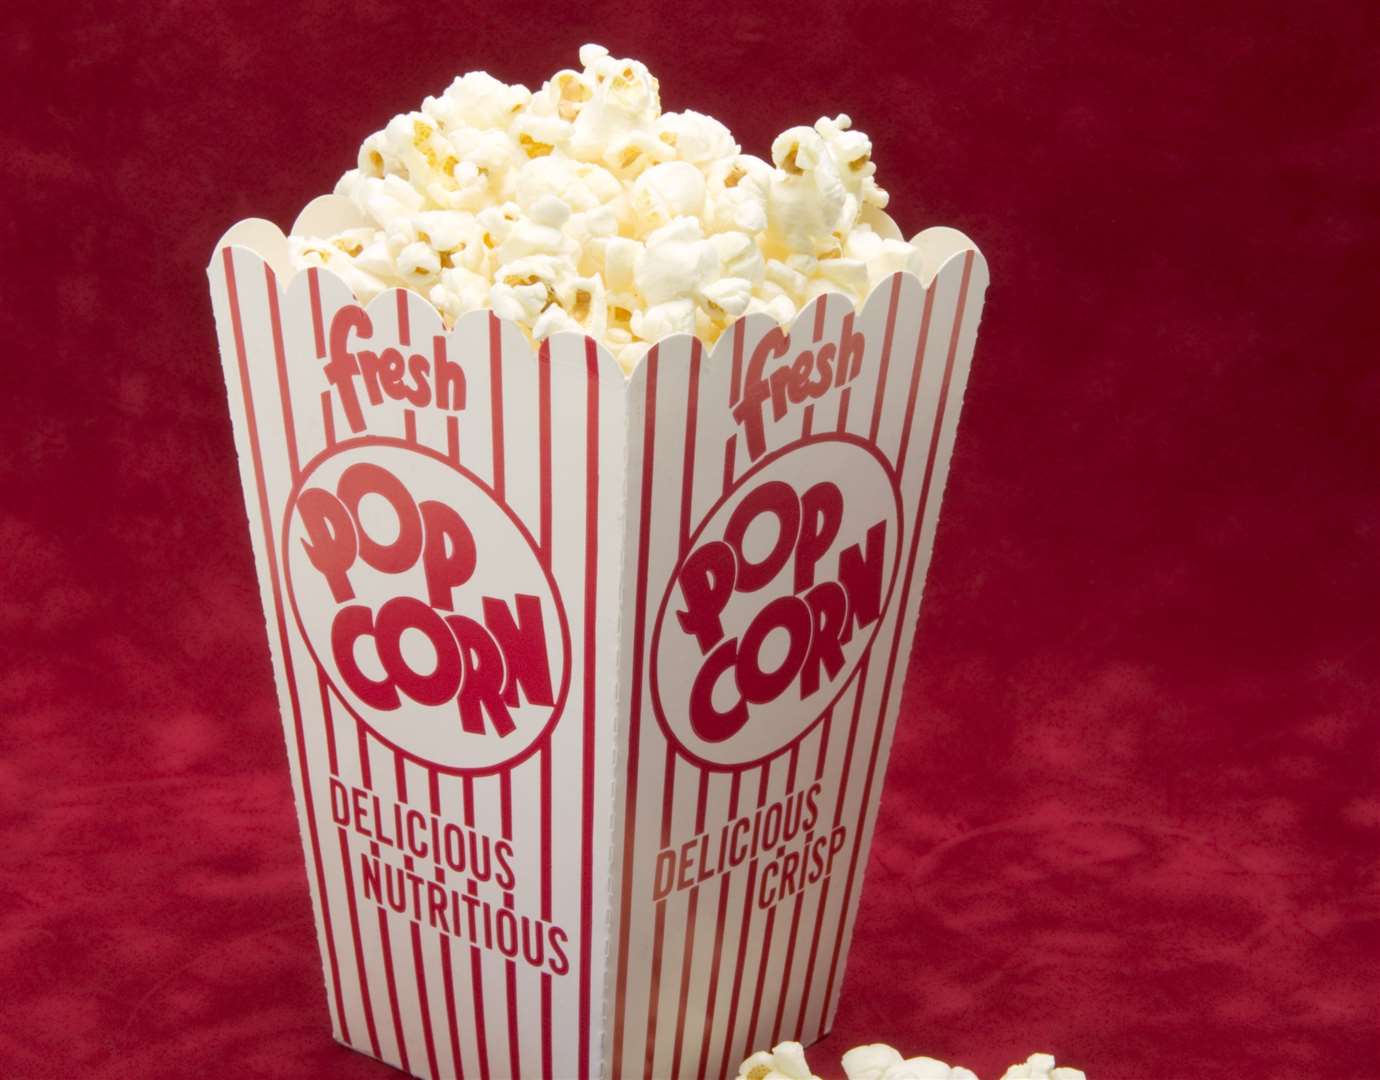 A piece of popcorn got lodged at the back of Claire's throat. Picture: Thinkstock Image Library